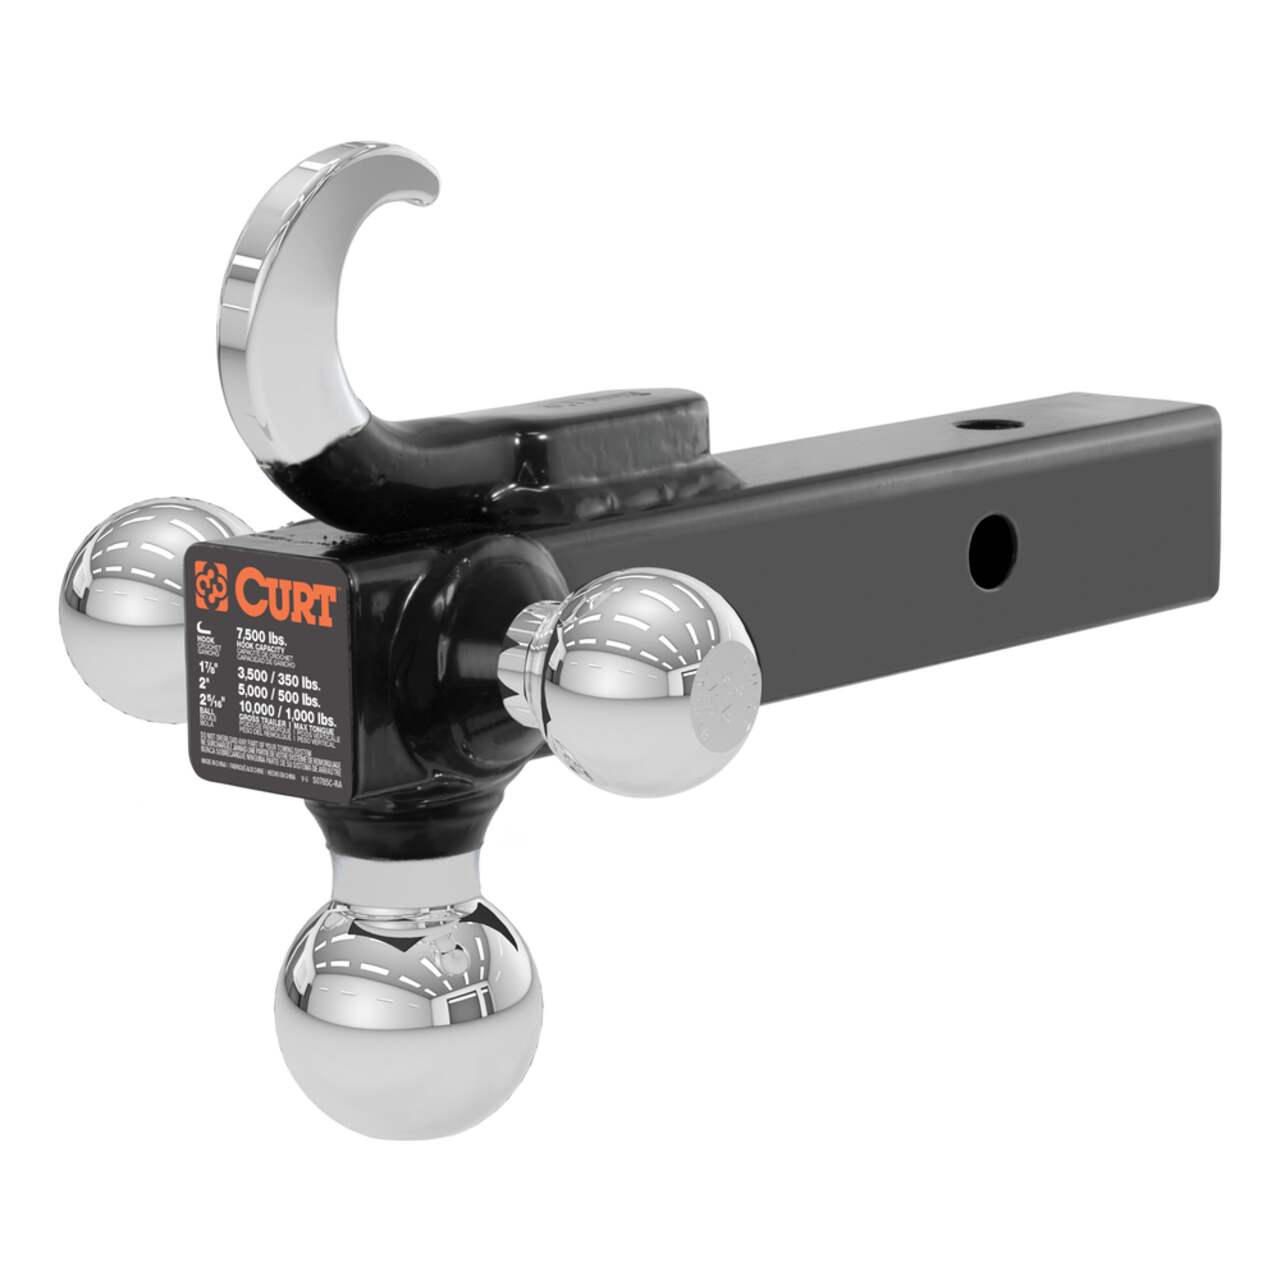 CURT Multi-Ball Mount with Hook (1-7/8-in, 2-in & 2-5/16-in Chrome